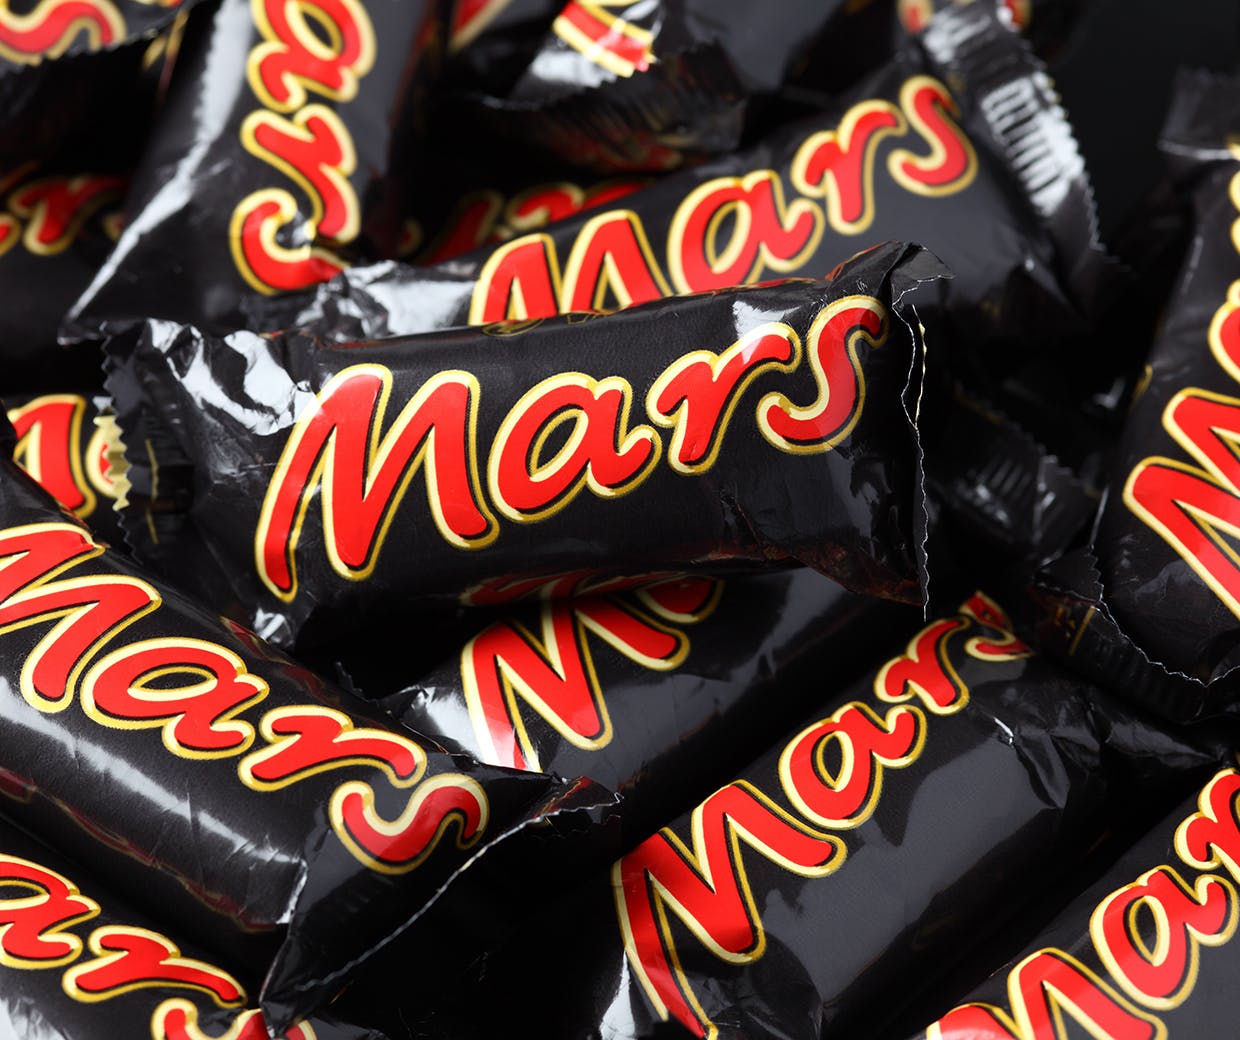 Mars's three-point strategy to improve gender equality in its advertising